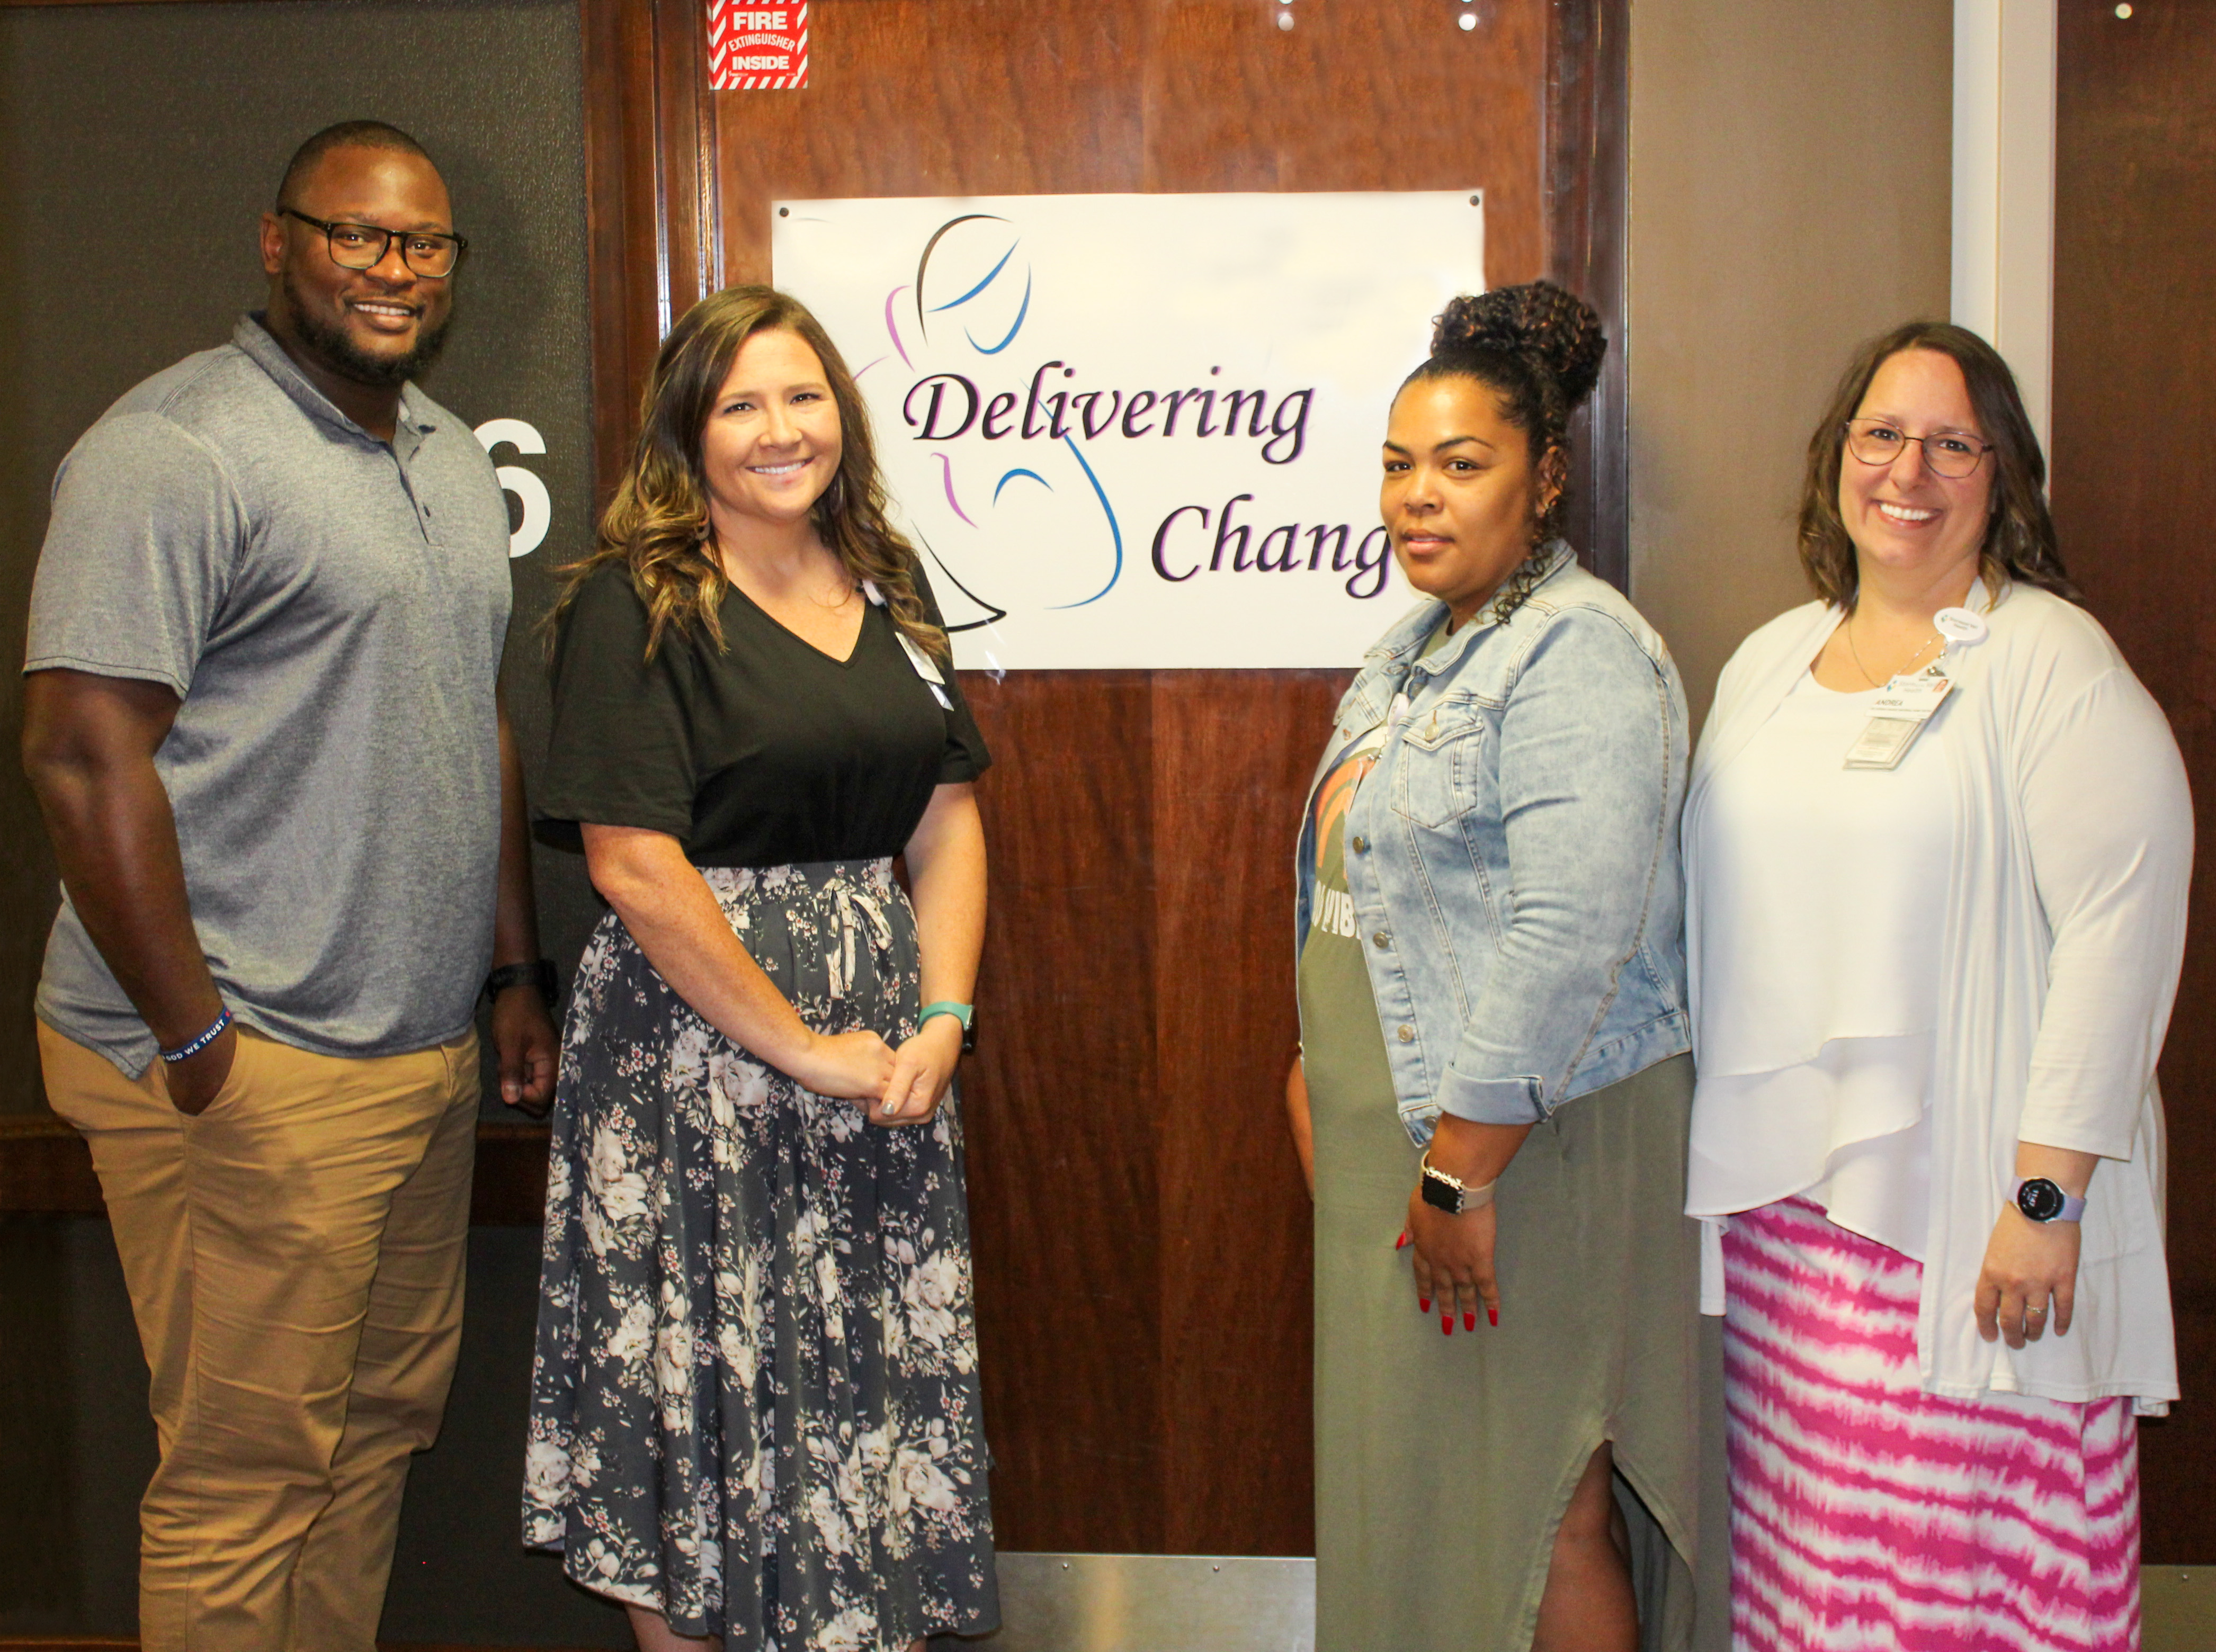 A group of health care working standing in front of a Delivering Change sign at Stormont Vail Health Manhattan